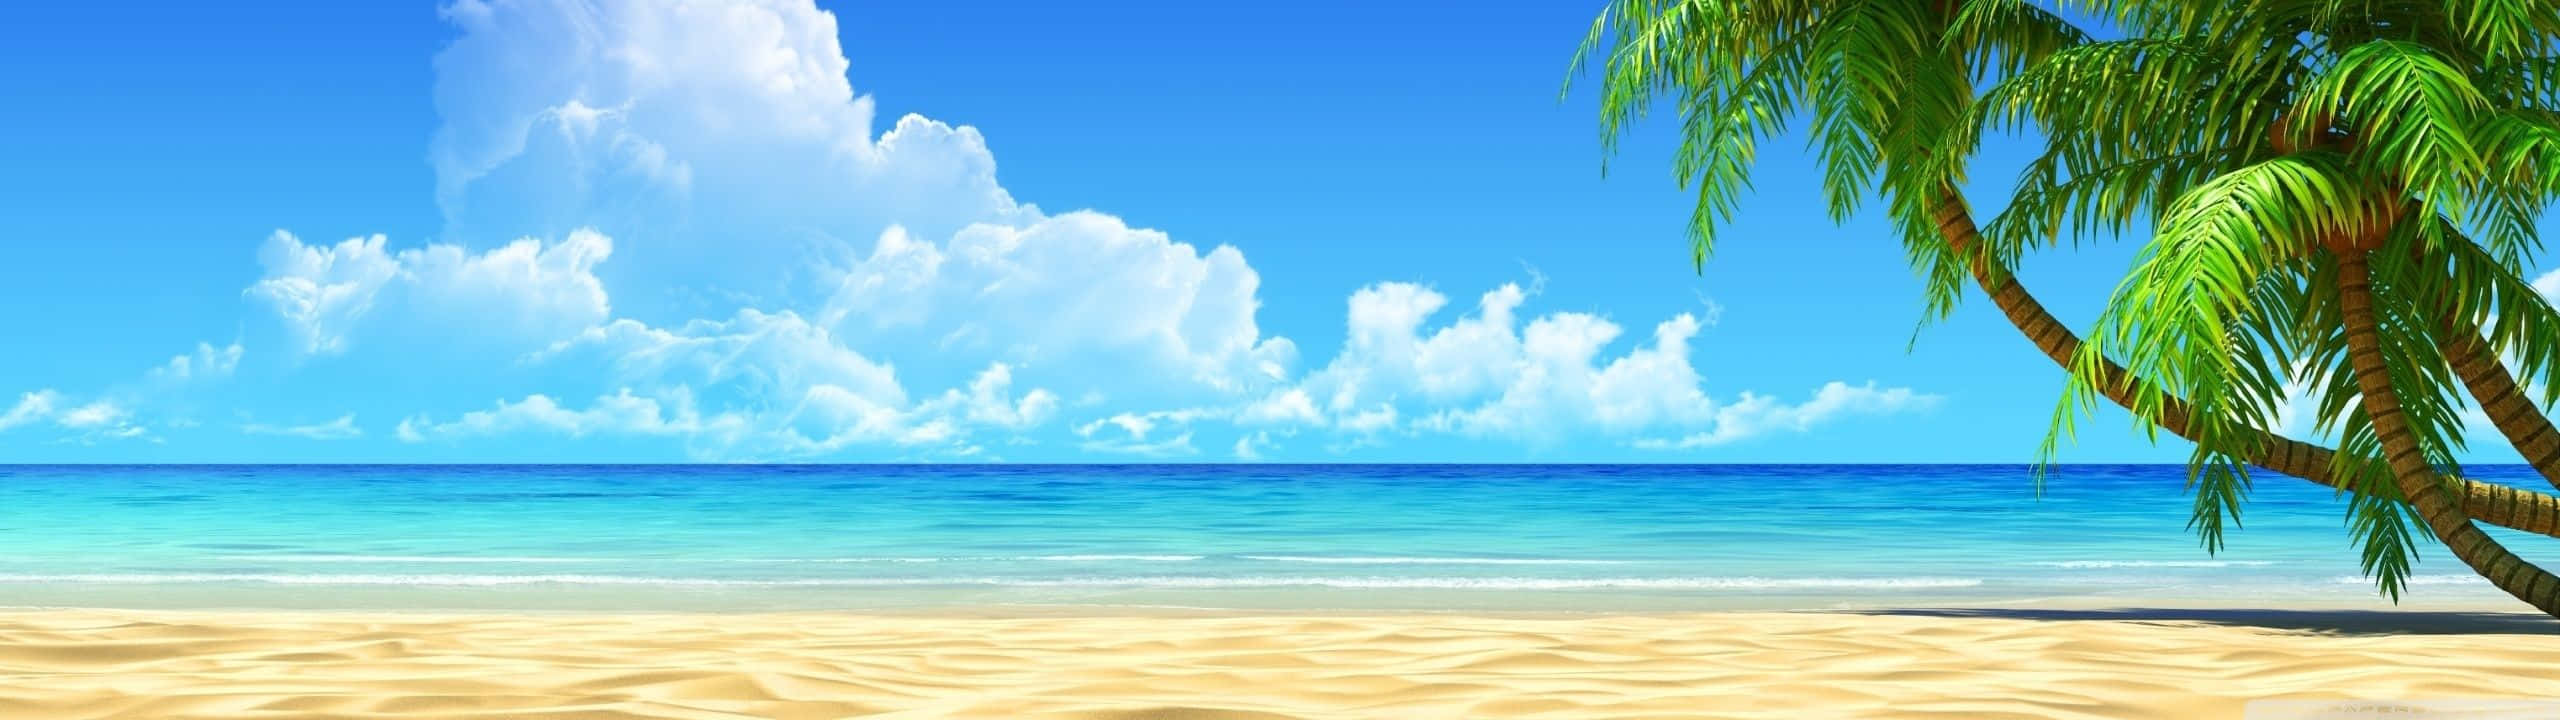 Enjoy the beauty of the Beach with a Dual Monitor Setup Wallpaper